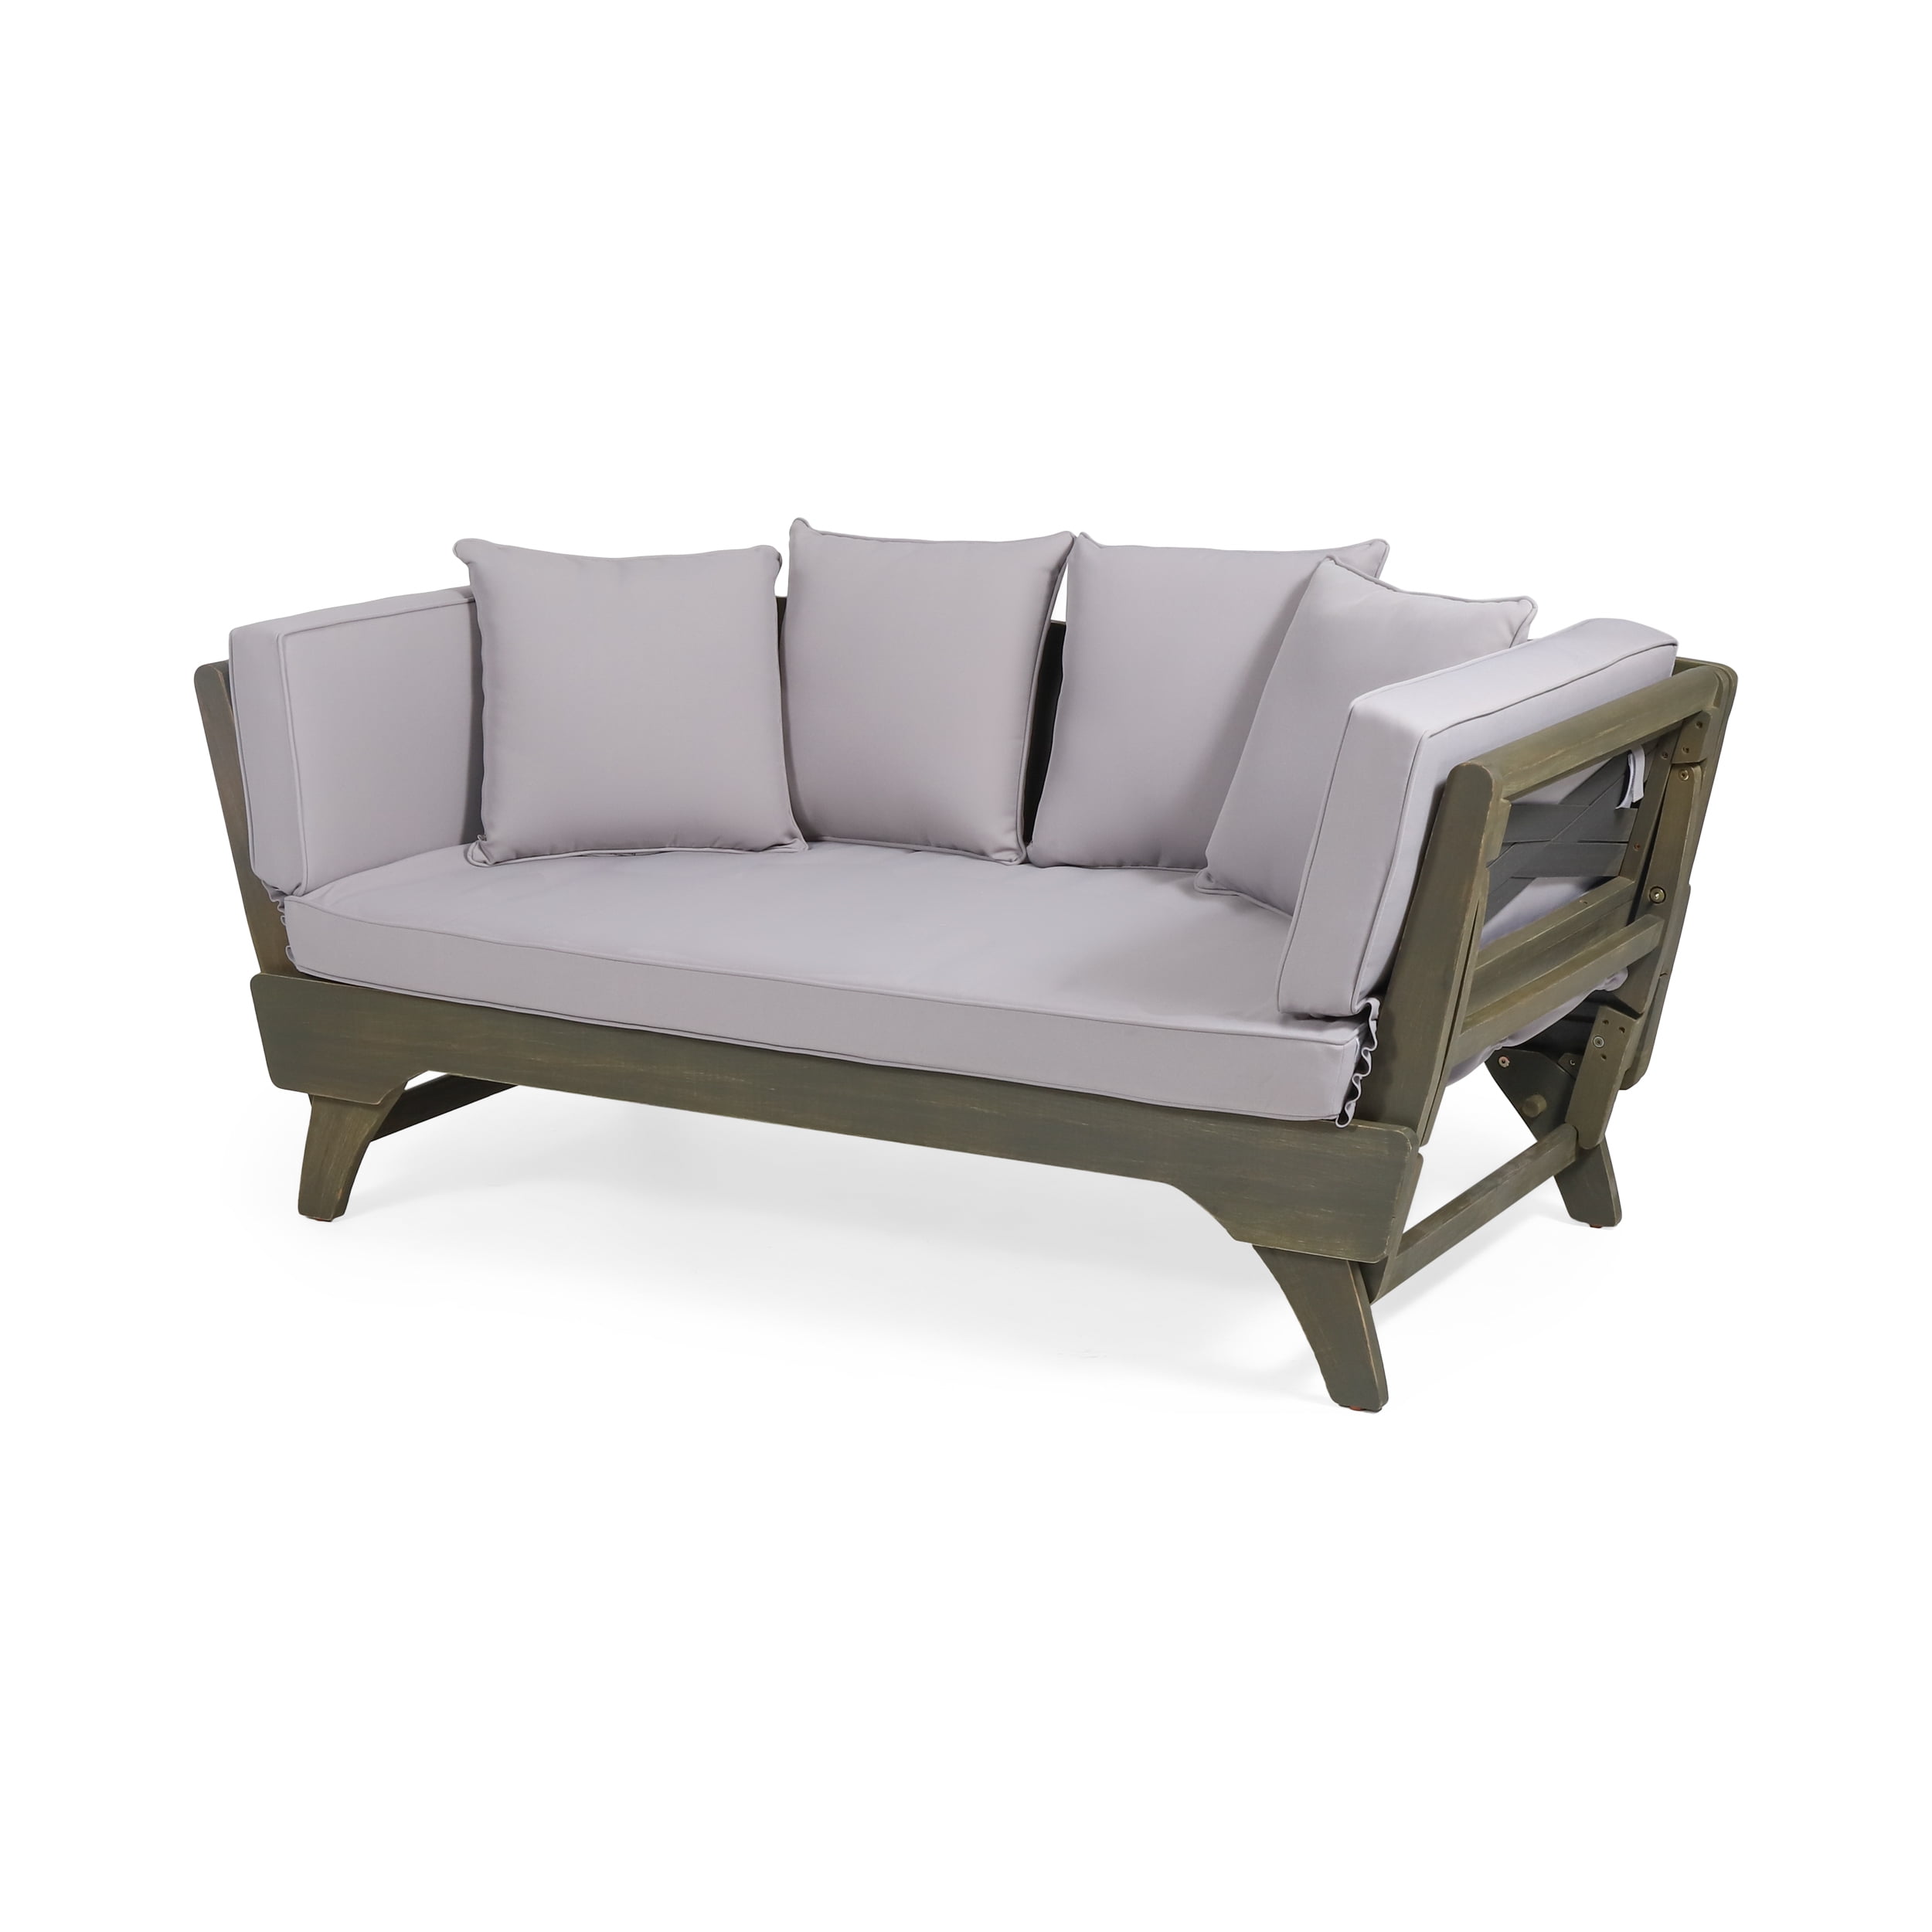 Outdoor Deck & Patio Lounge Set w/Folding Design & Weather-Resistance Convertible Sofa Bed Color : Grey 